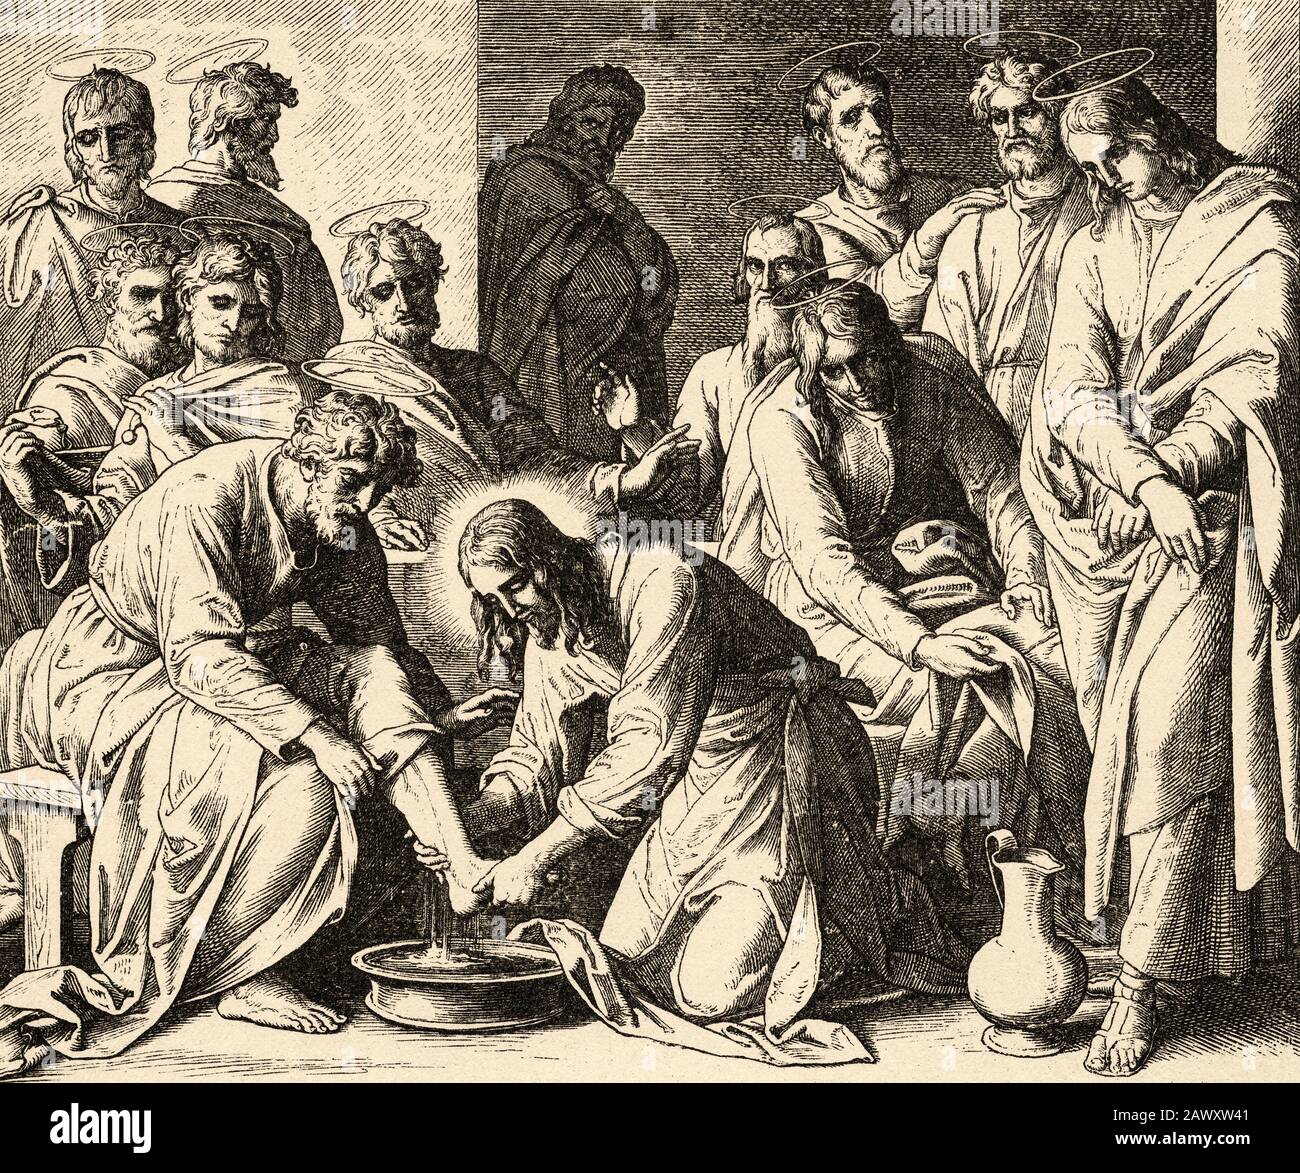 The foot washing. Our Lord Jesus the son of God washes the feet of his disciples. John book, New Testament Sacred biblical history. Old engraving Stock Photo